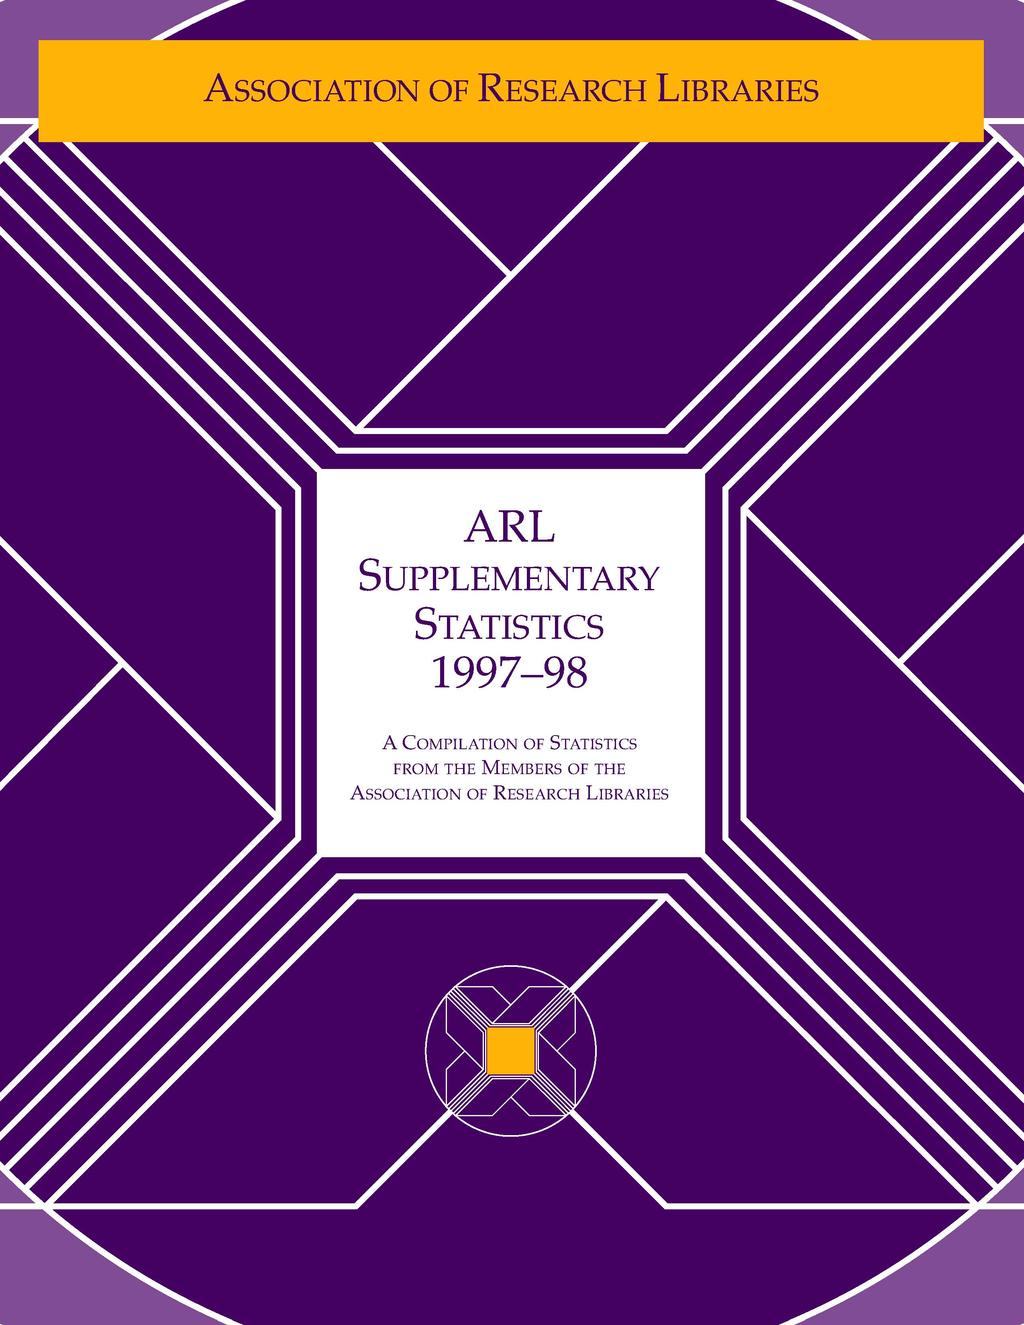 ARL SUPPLEMENTARY STATISTICS 1997-98 A COMPILATION OF